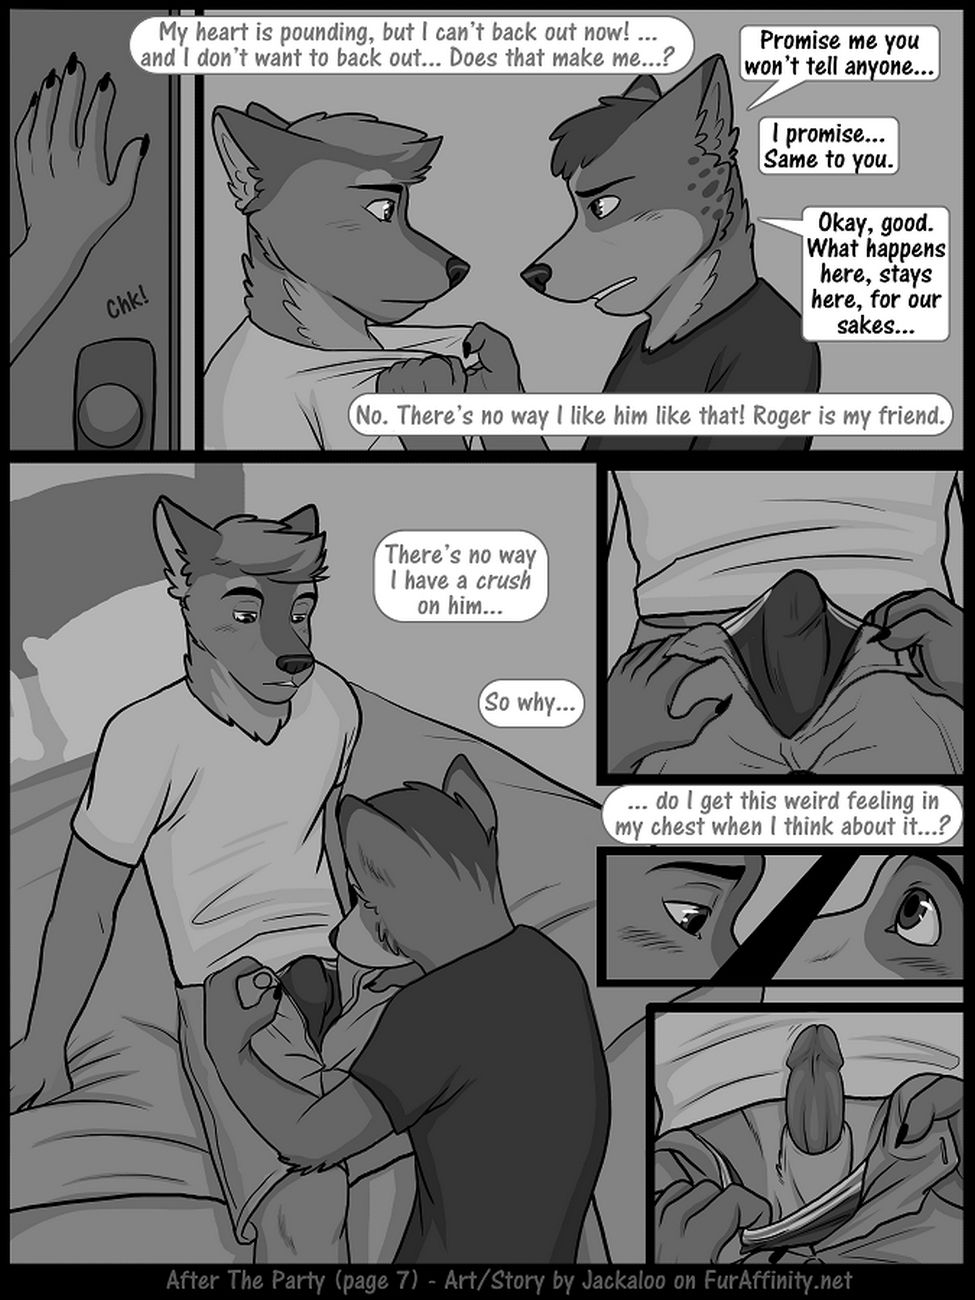 After The Party page 8